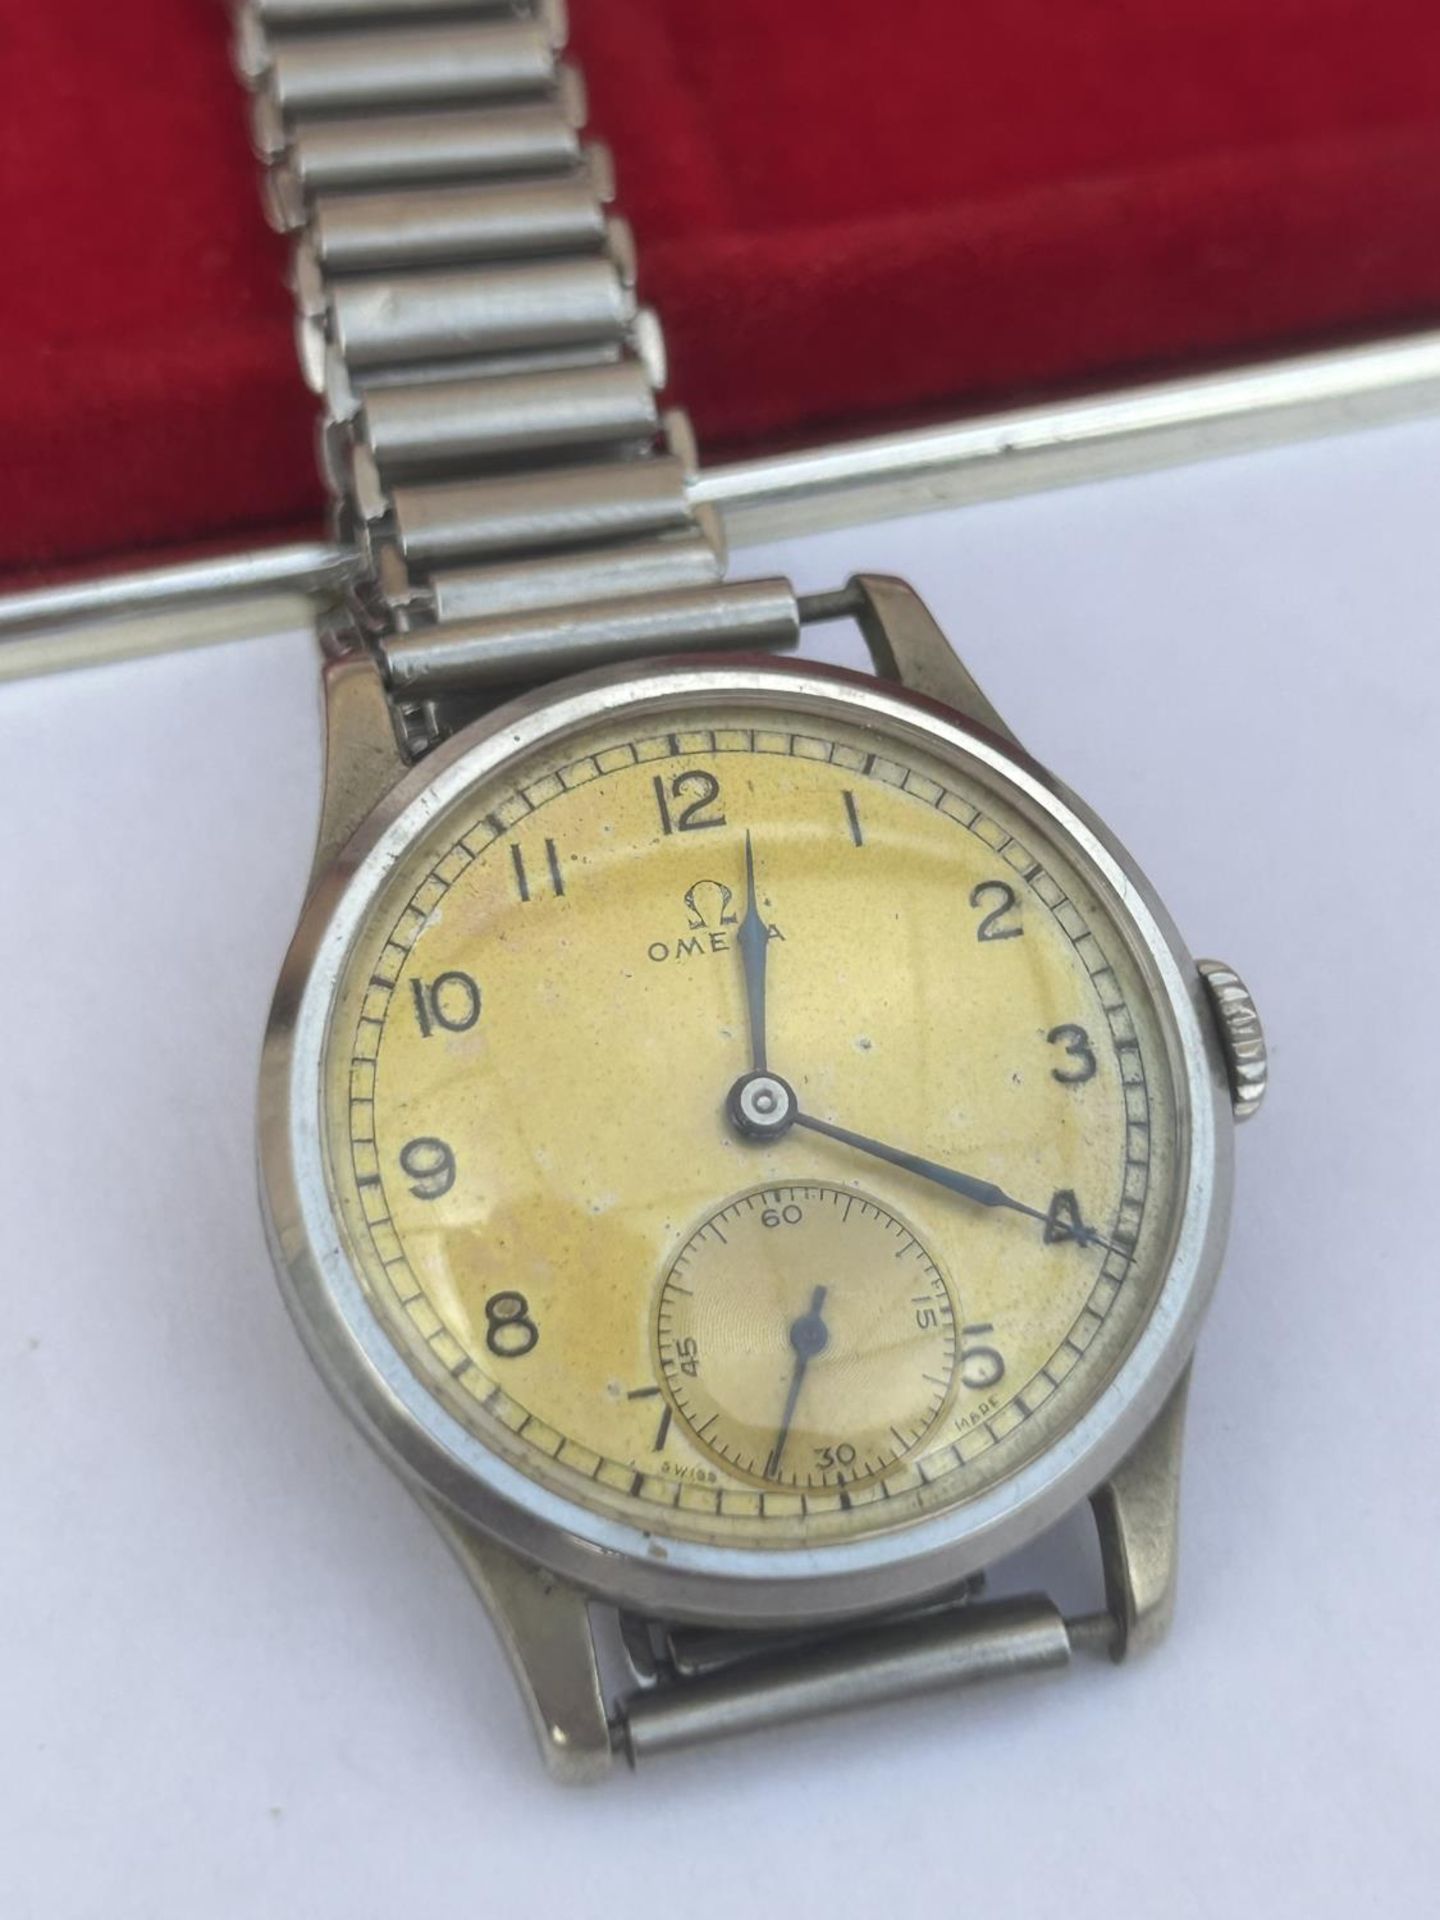 A VINTAGE MID CENTURY GENTS OMEGA AUTOMATIC WATCH, COMPLETE WITH ORIGINAL BOX, WORKING AT THE TIME - Image 2 of 5